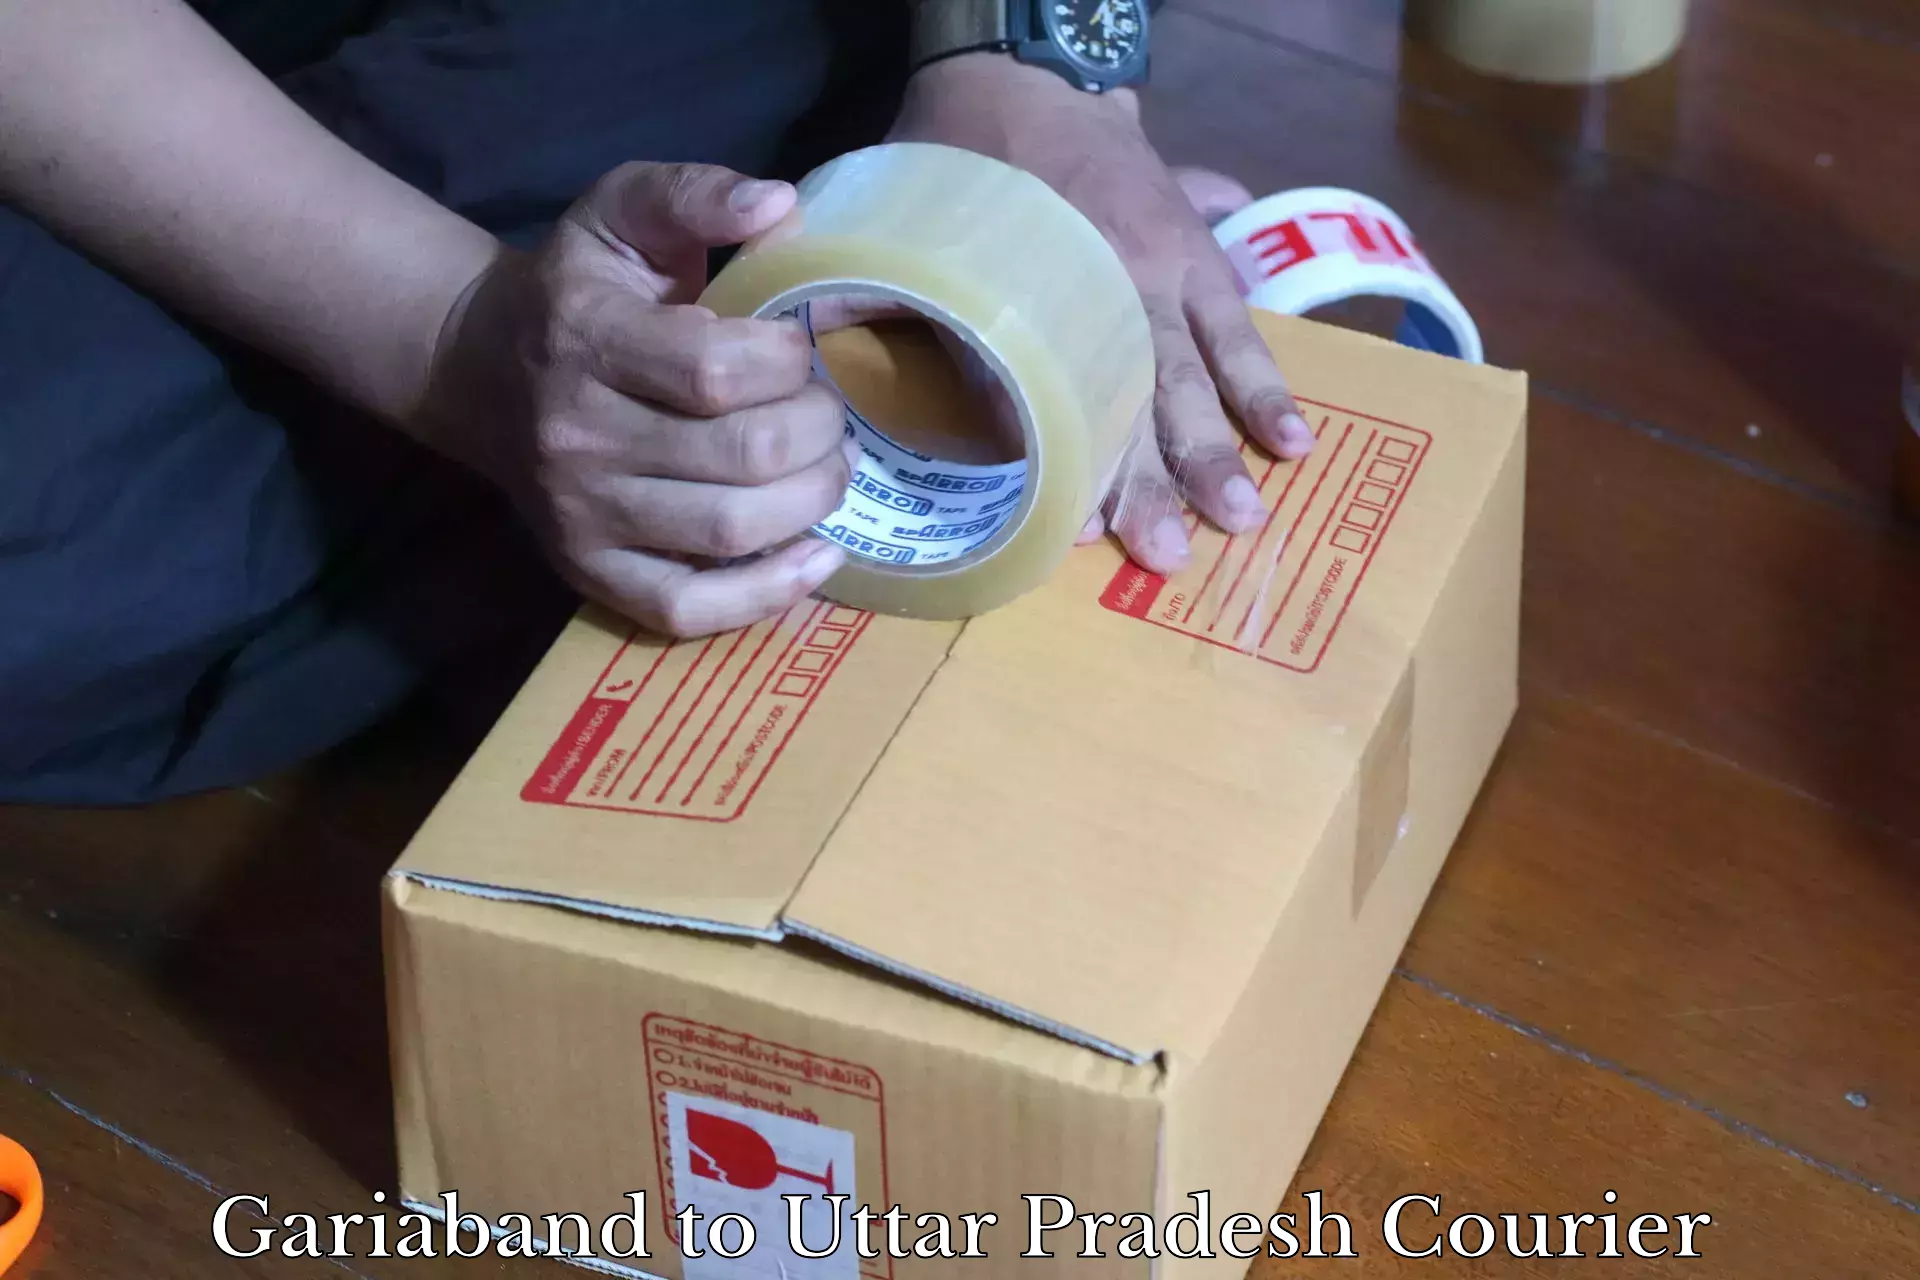 State-of-the-art courier technology Gariaband to Akbarpur